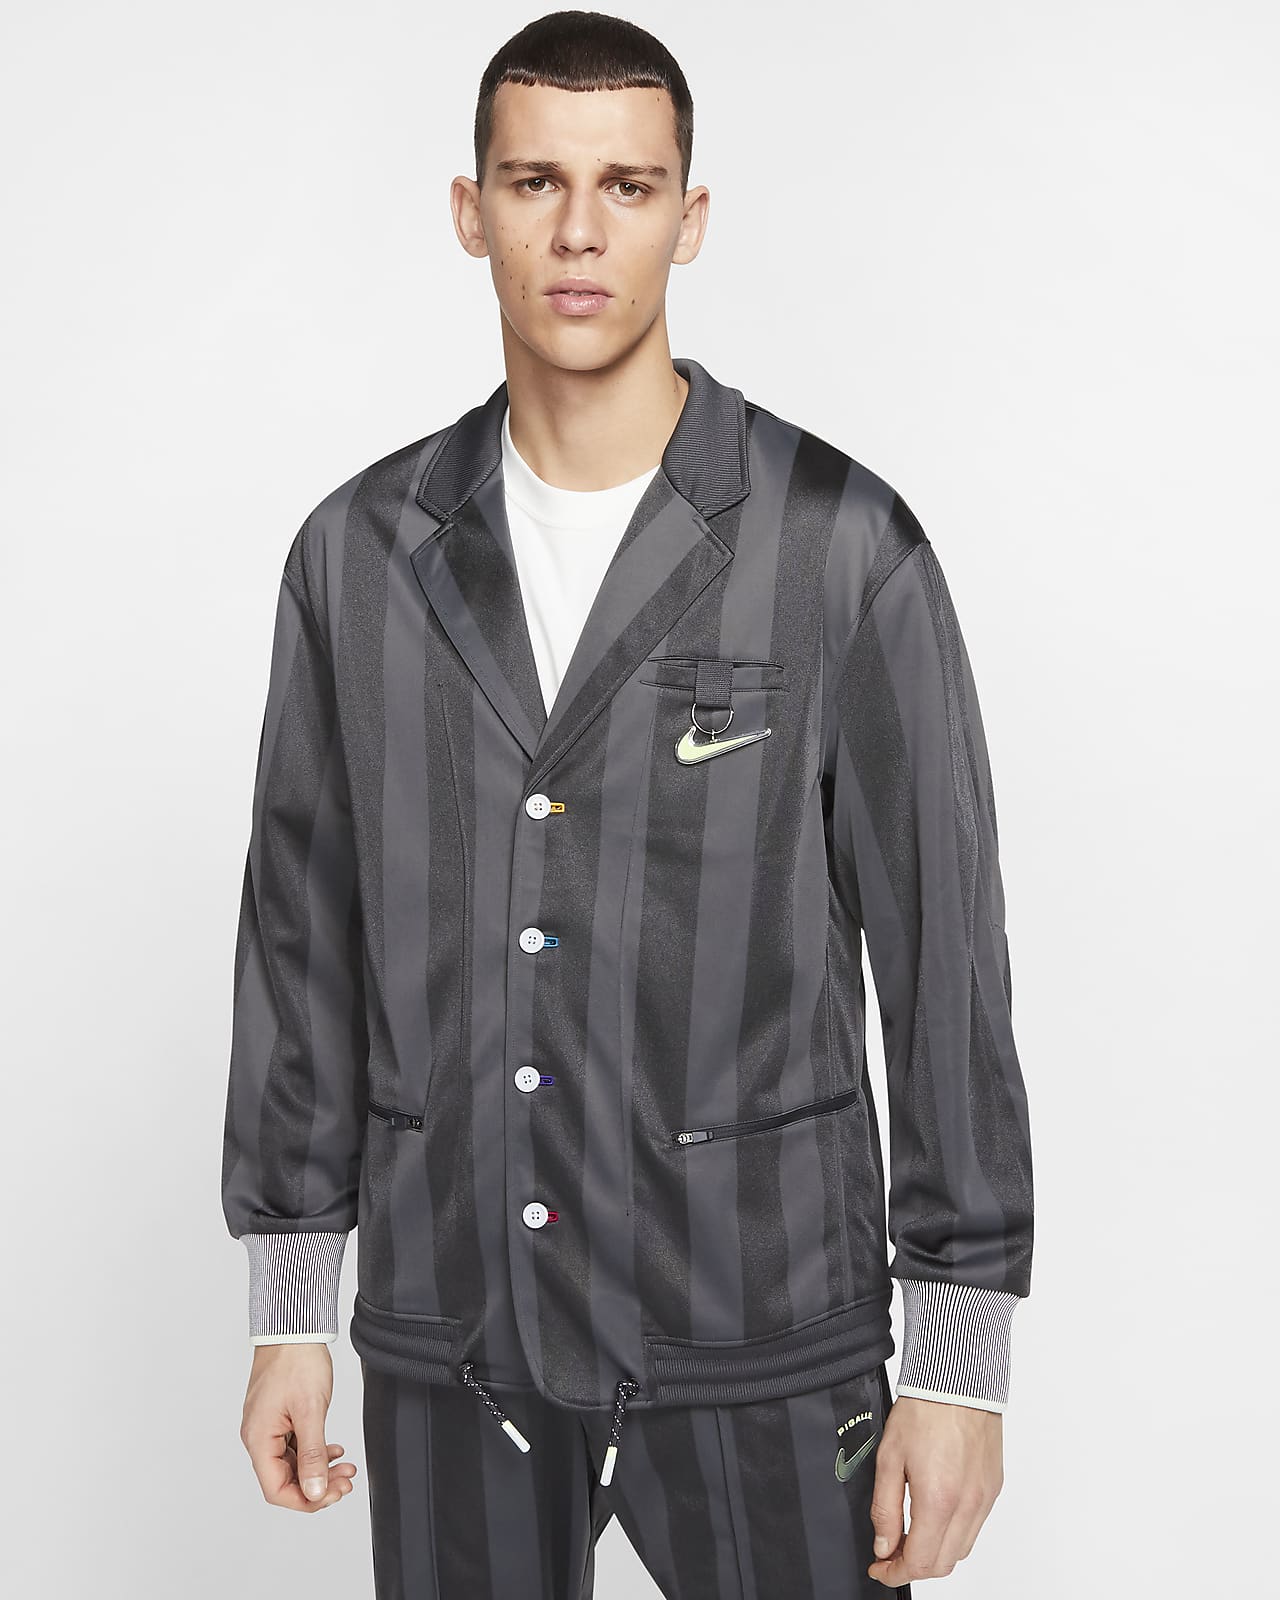 pigalle tracksuit